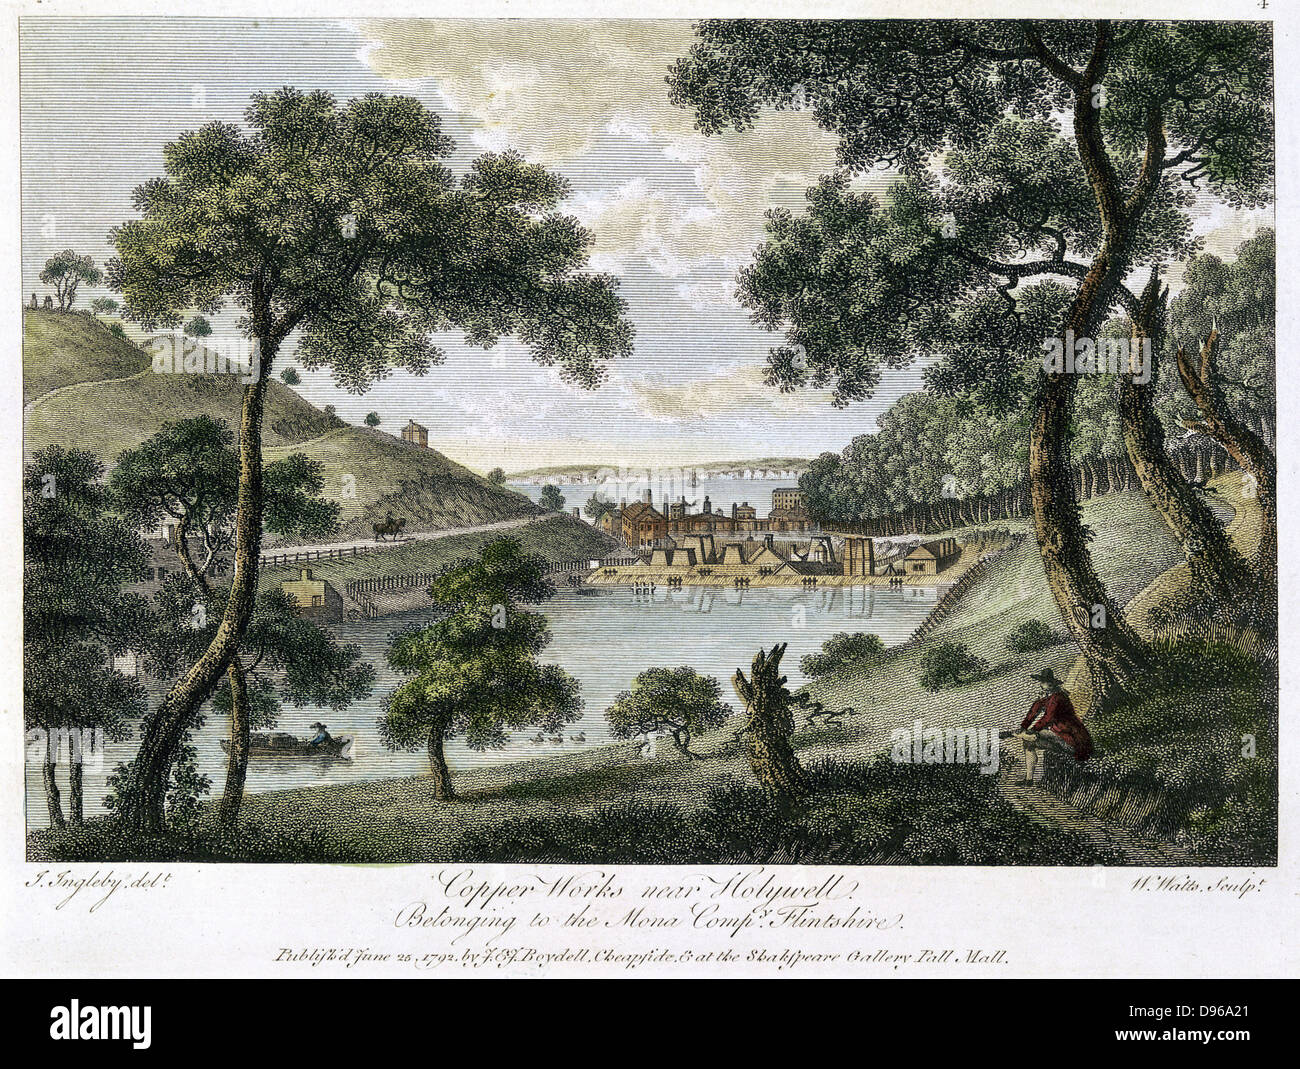 Copperworks near Holywell, Flintshire, Wales owned by the Mona Company, showing industrialisation in a rural landscape. Copper was mined in Angelsey (Mona).  Hand coloured engraving 1792. Stock Photo